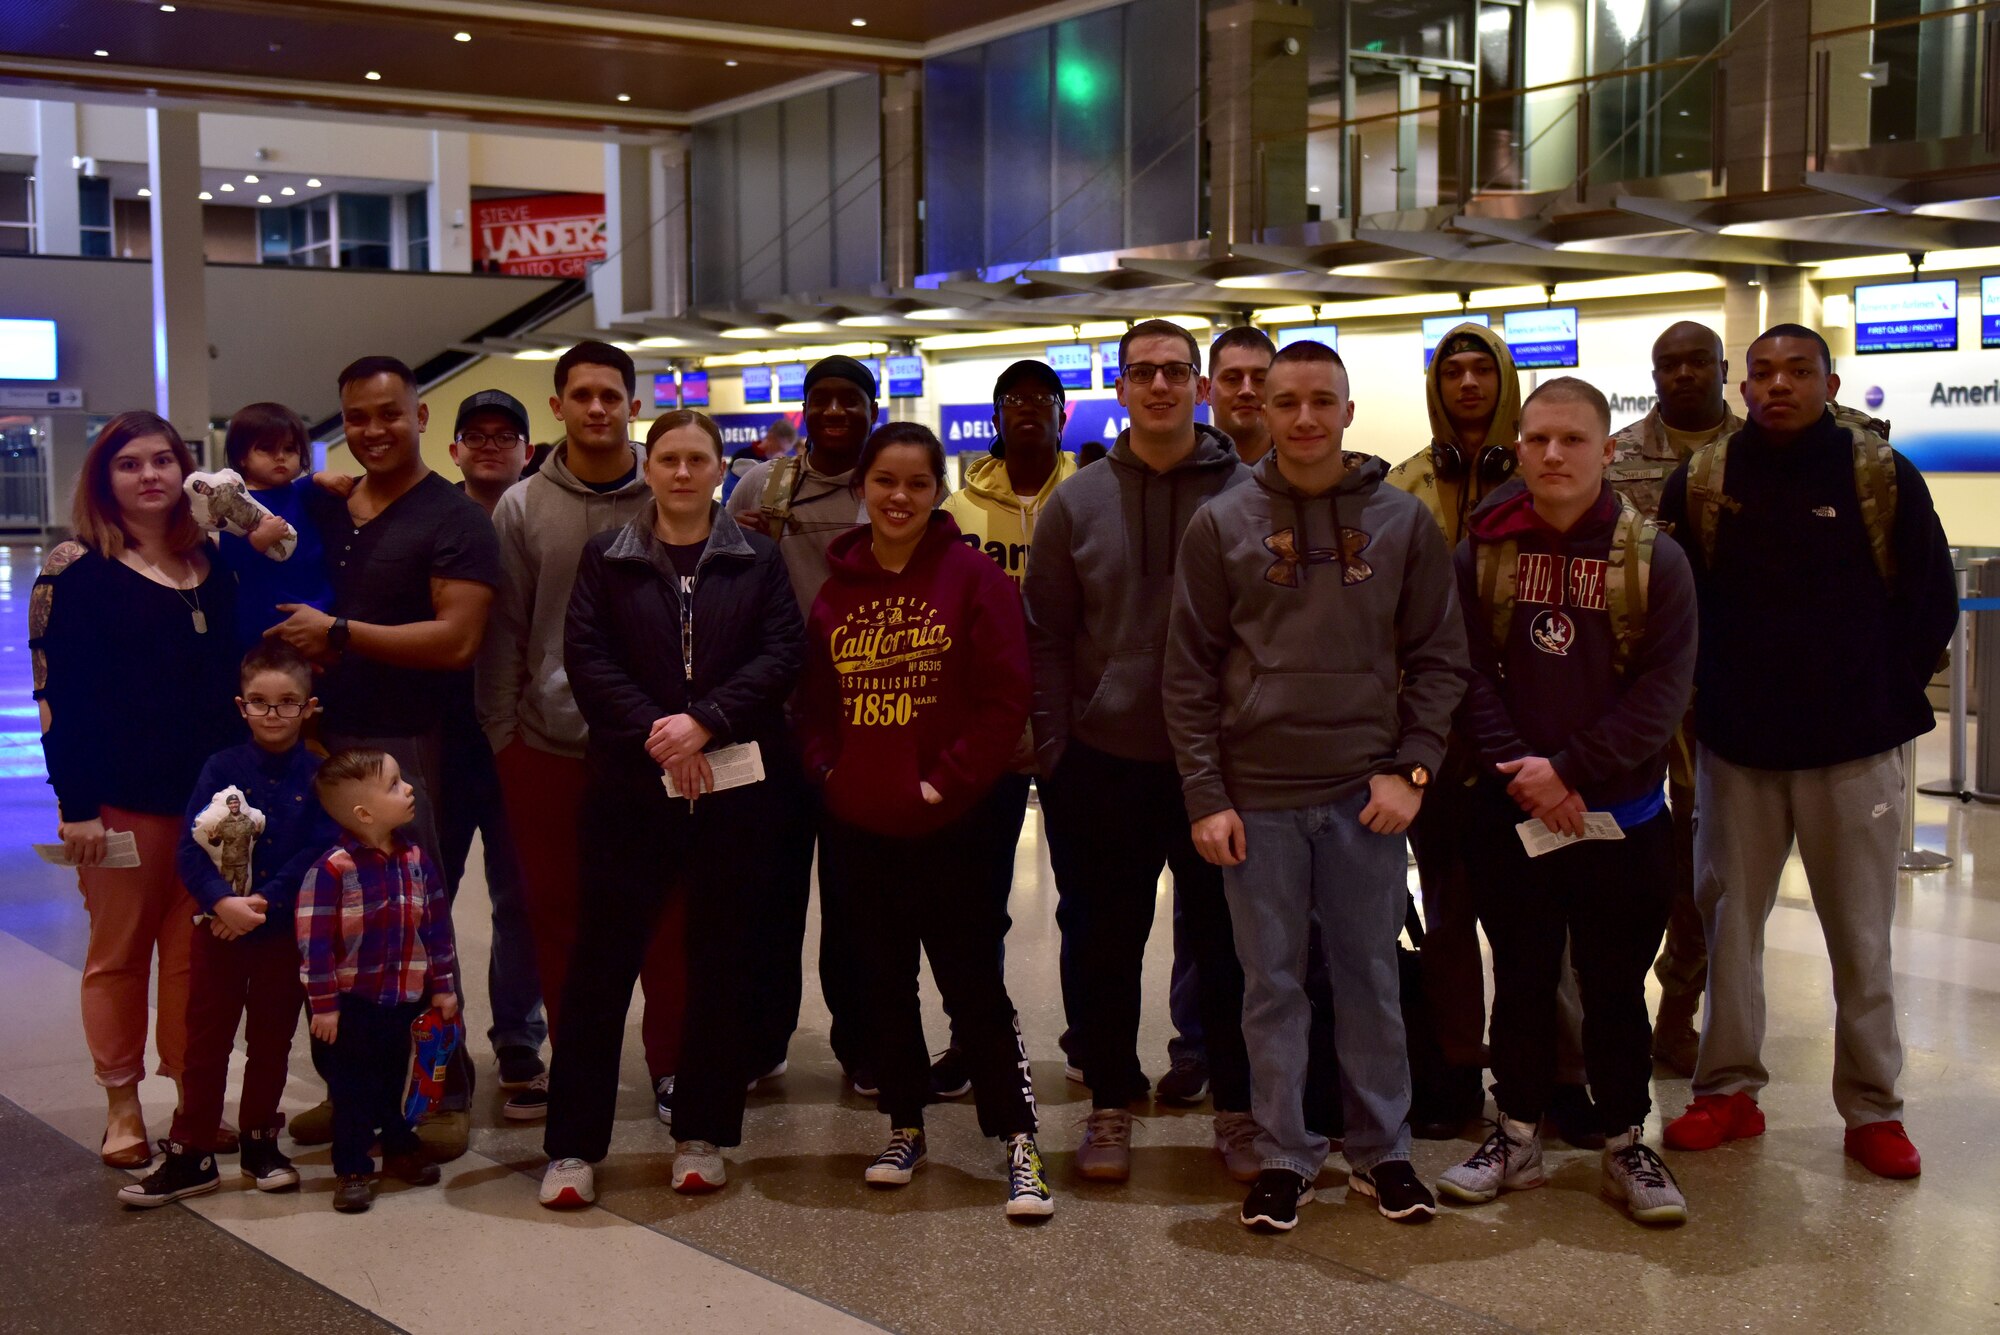 A group of people stand and smile at the camera in an Airport.